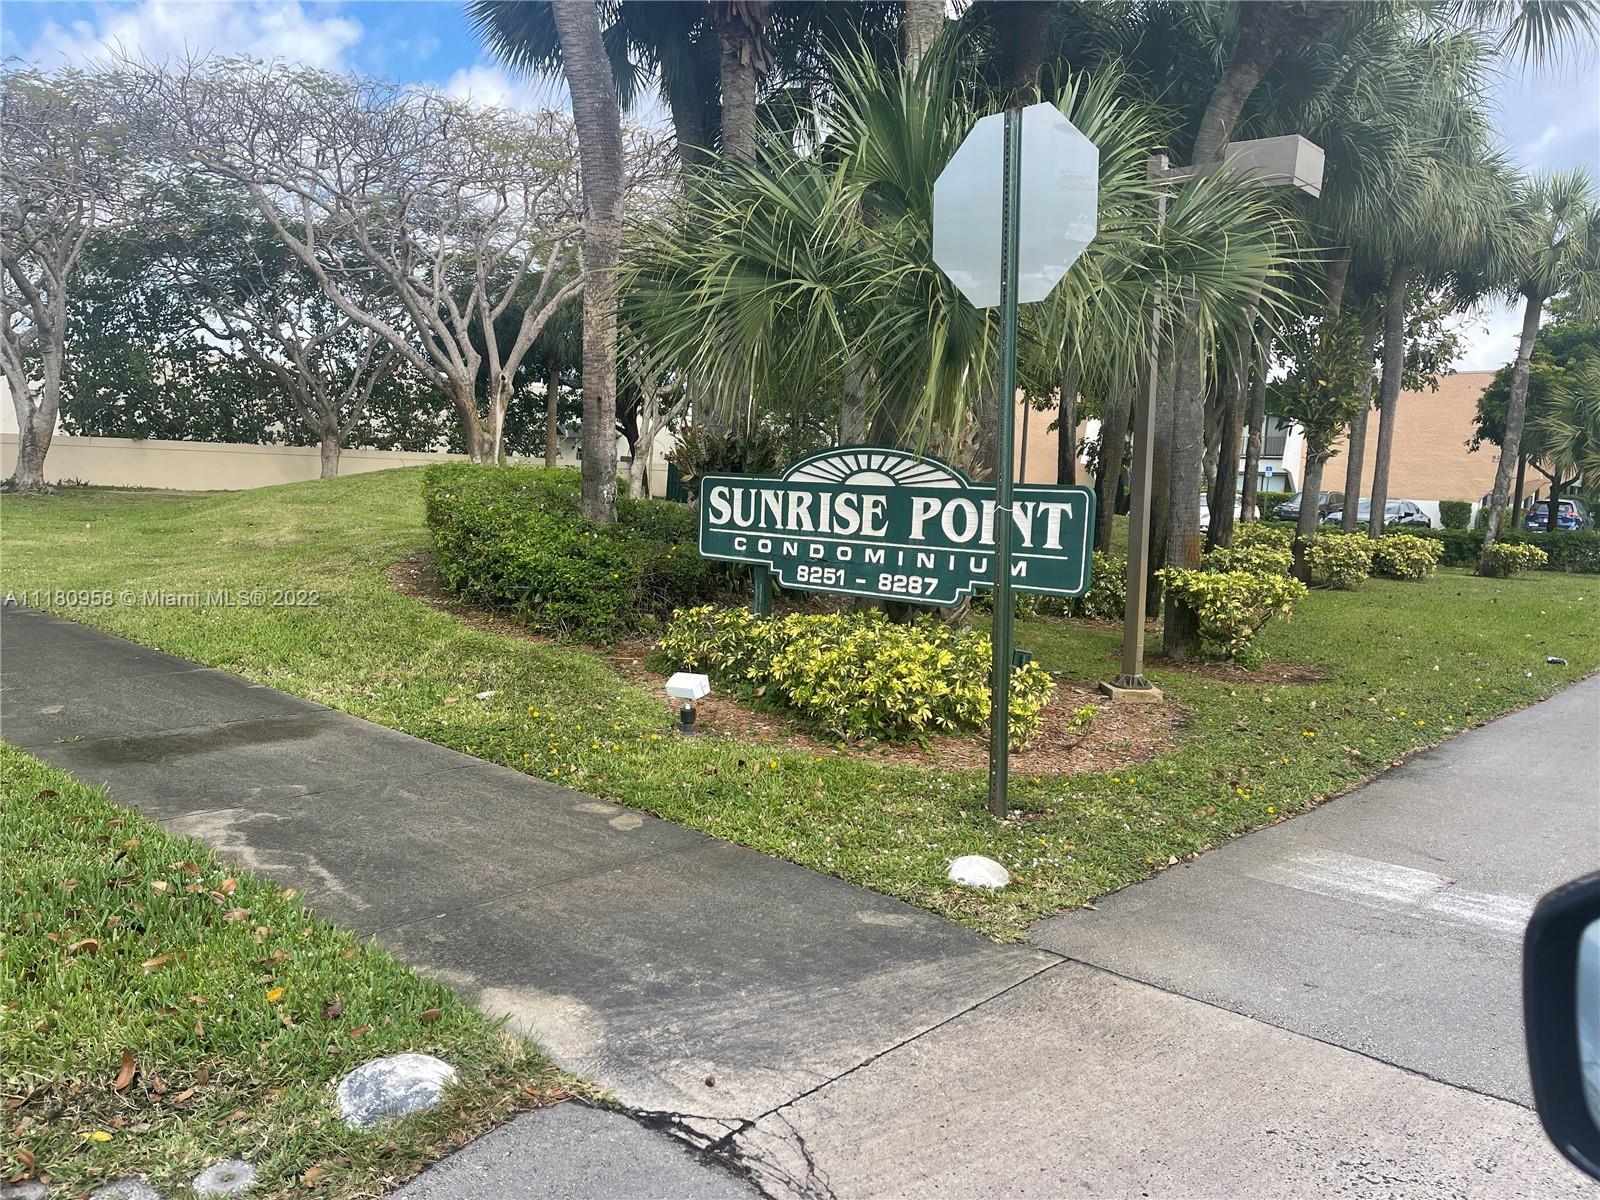 This is a Great Opportunity to own 3 bedrooms/2 bathrooms in this hidden gem condo, located in a quiet and desirable Pinecrest Area. Amenities include a fenced in private pool, a full size tennis court, a clubhouse, a BBQ area, a Gym and much more. Walking distance to almost everything. Great Opportunity!!!